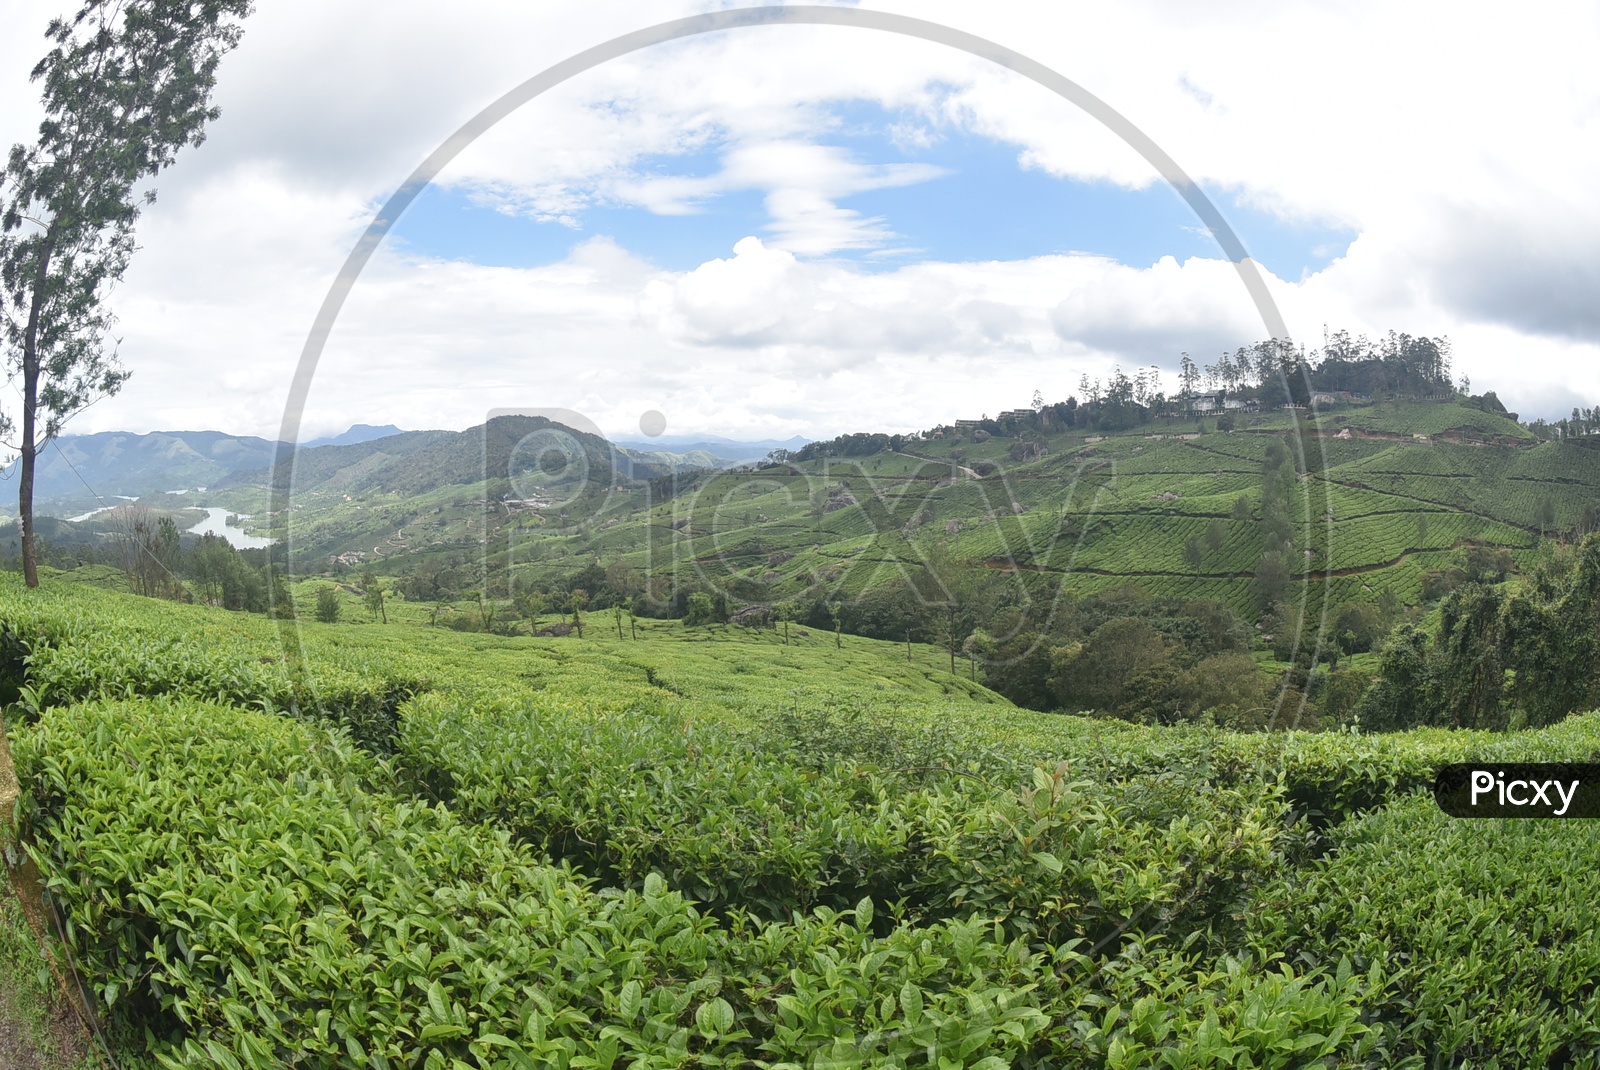 Landscape of Munnar mountains covered with tea plants